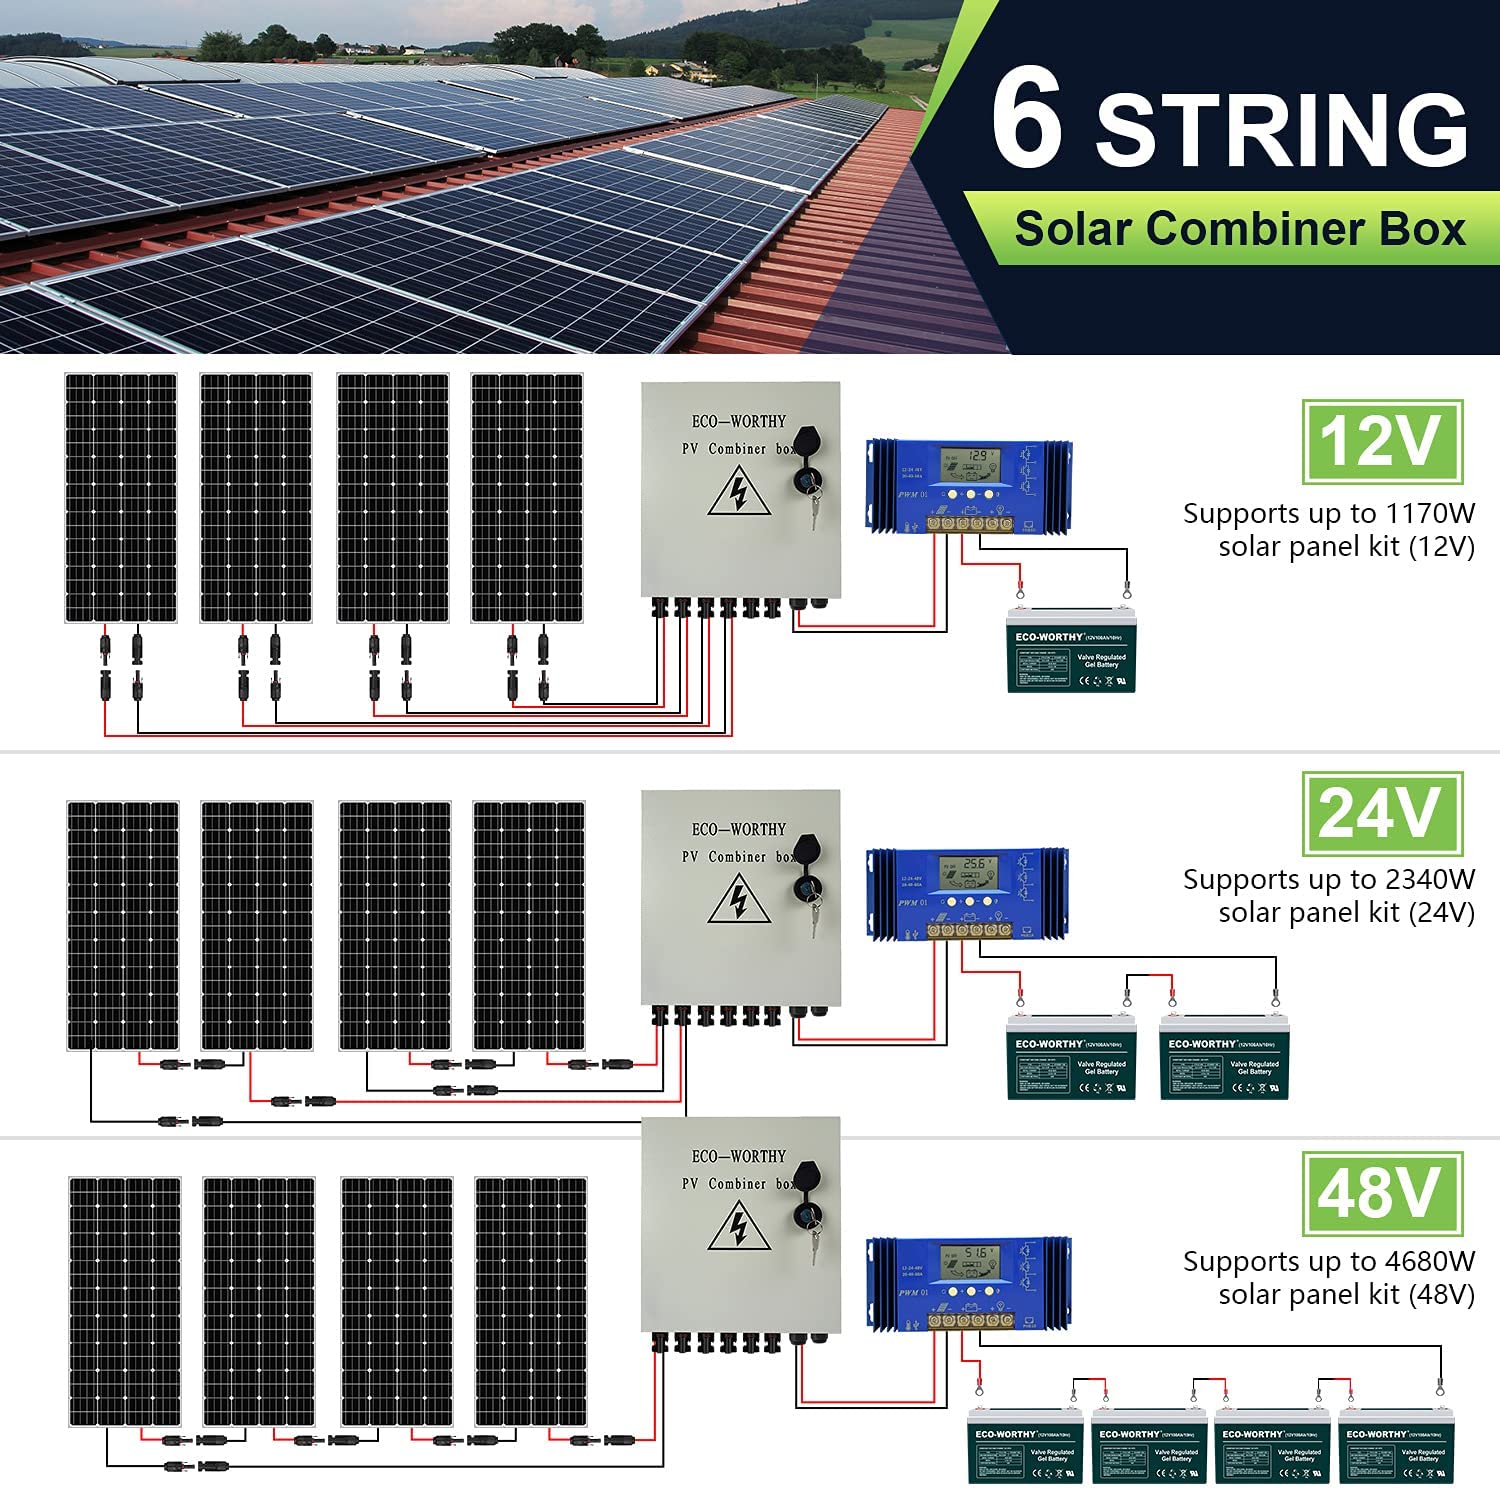 ECO-WORTHY 4 String PV Combiner Box